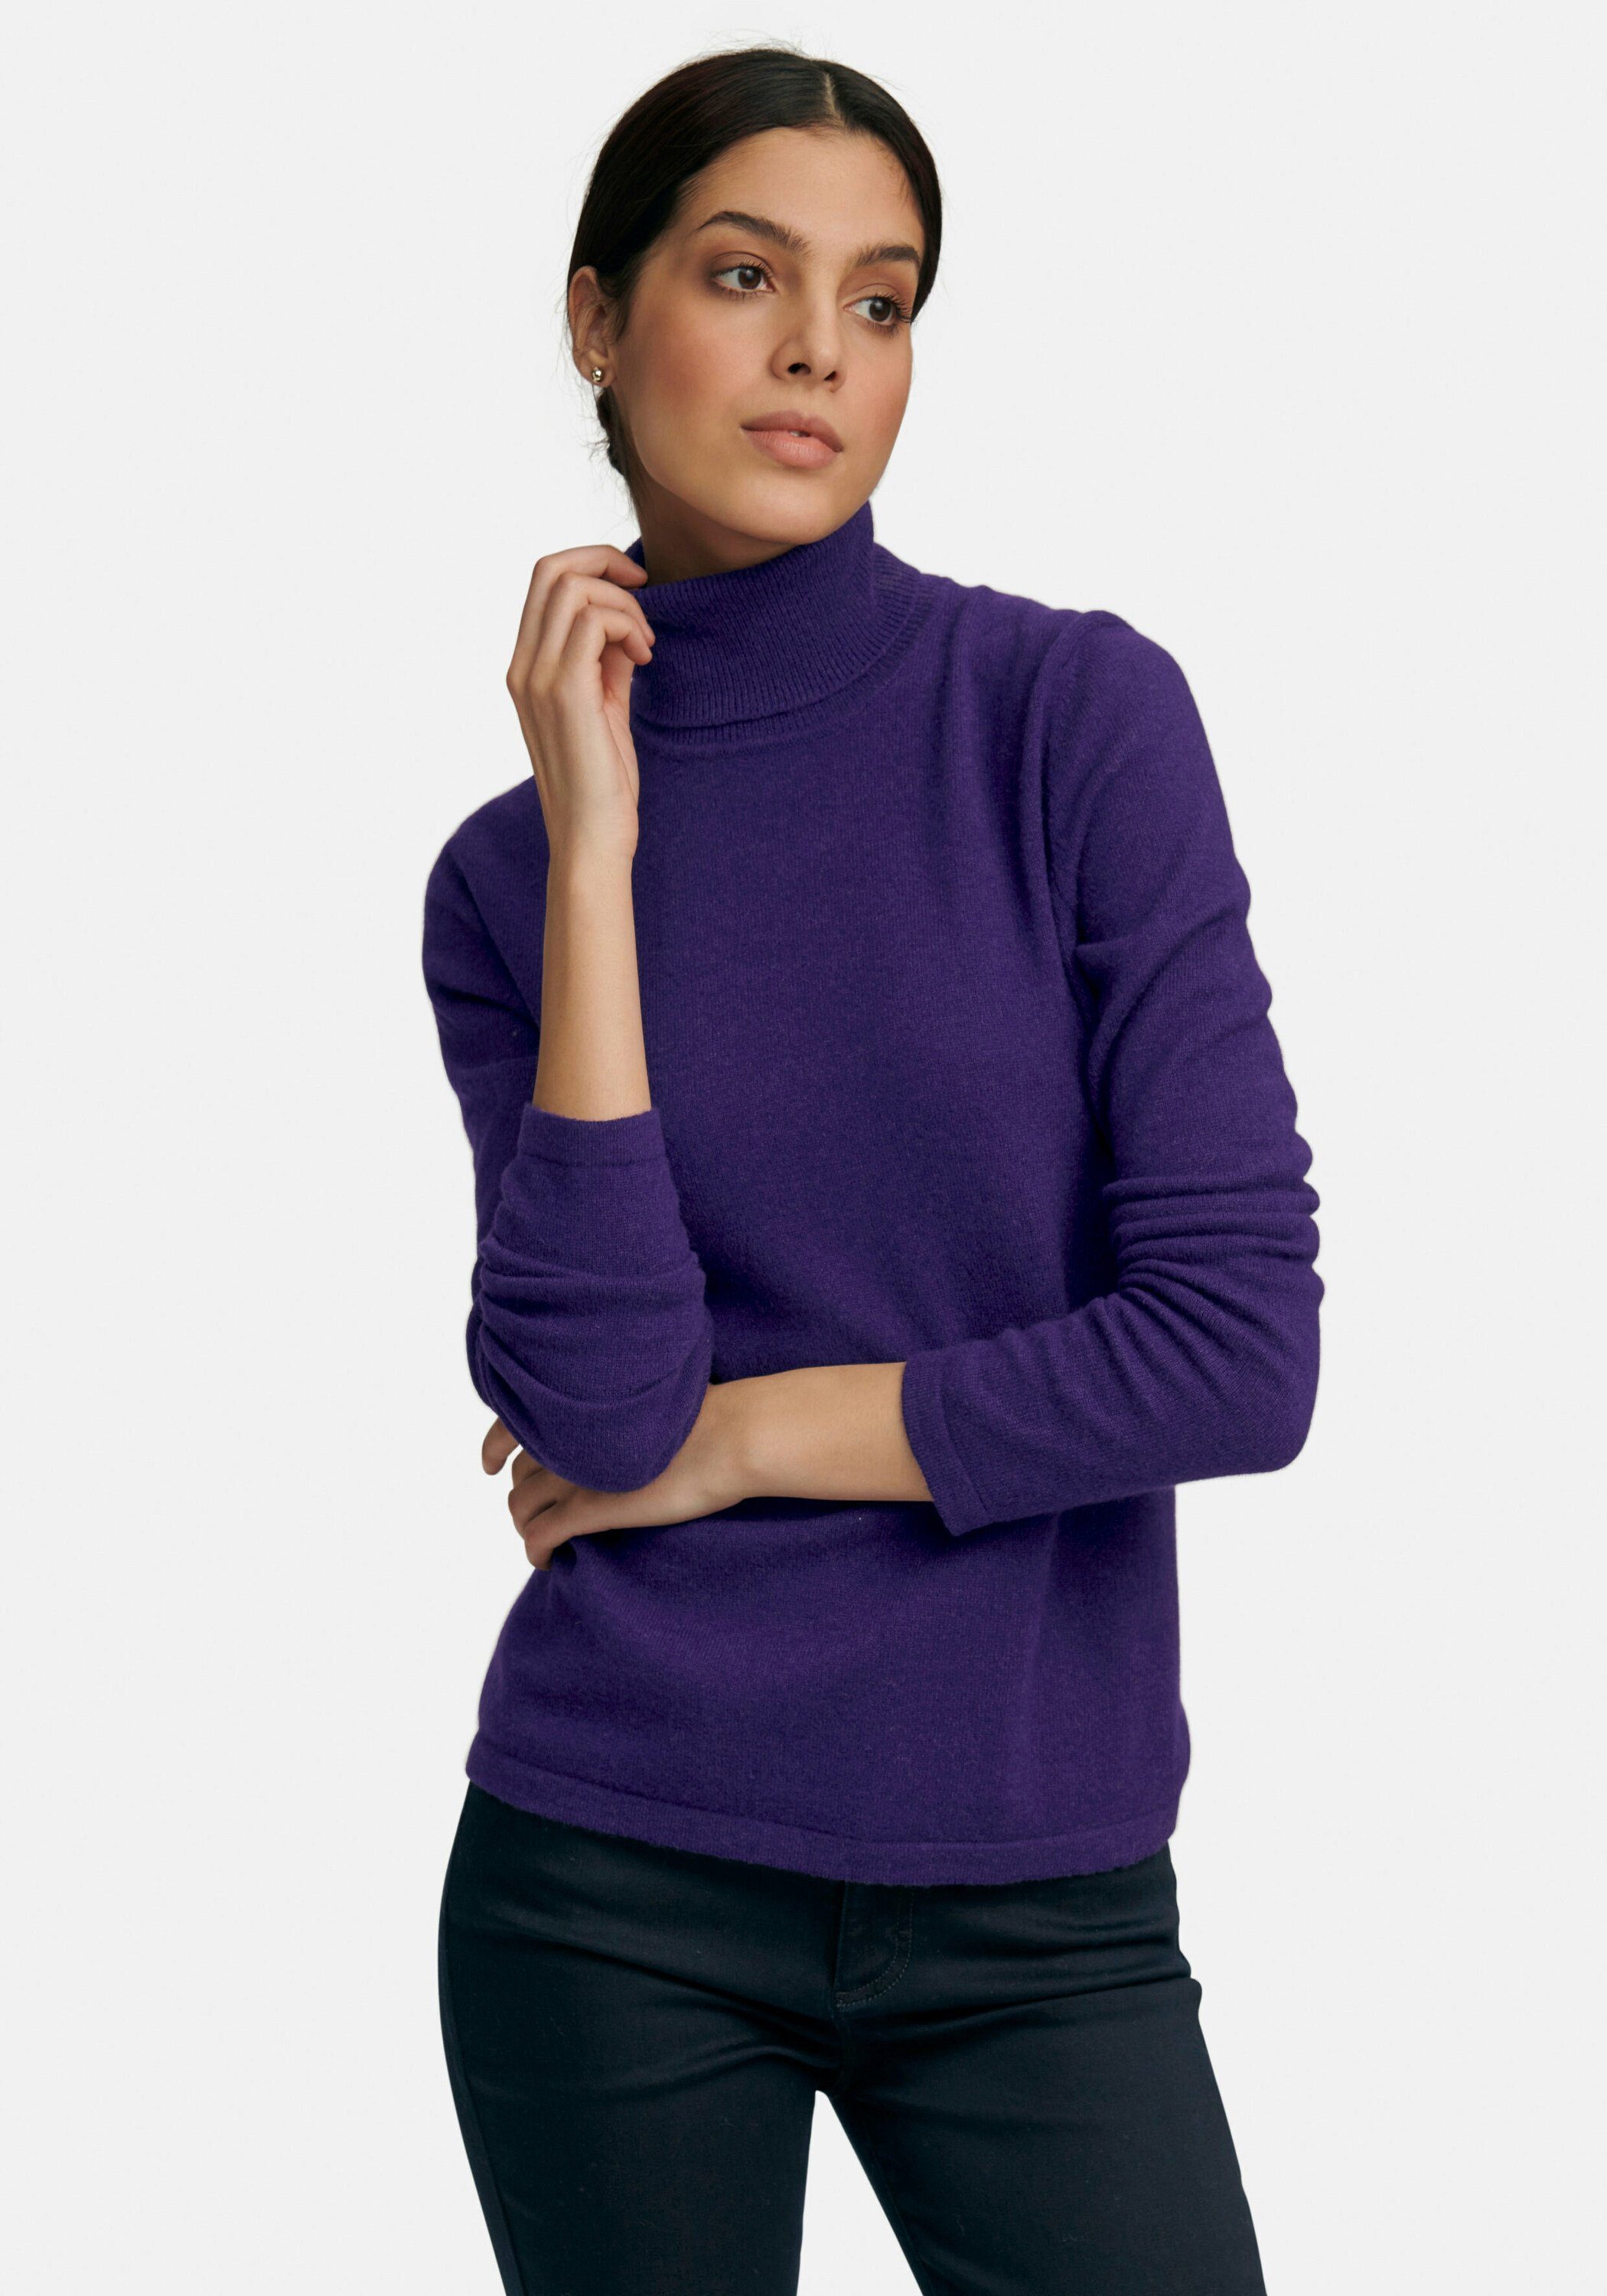 lila . Hahn Peter cashmere Strickpullover